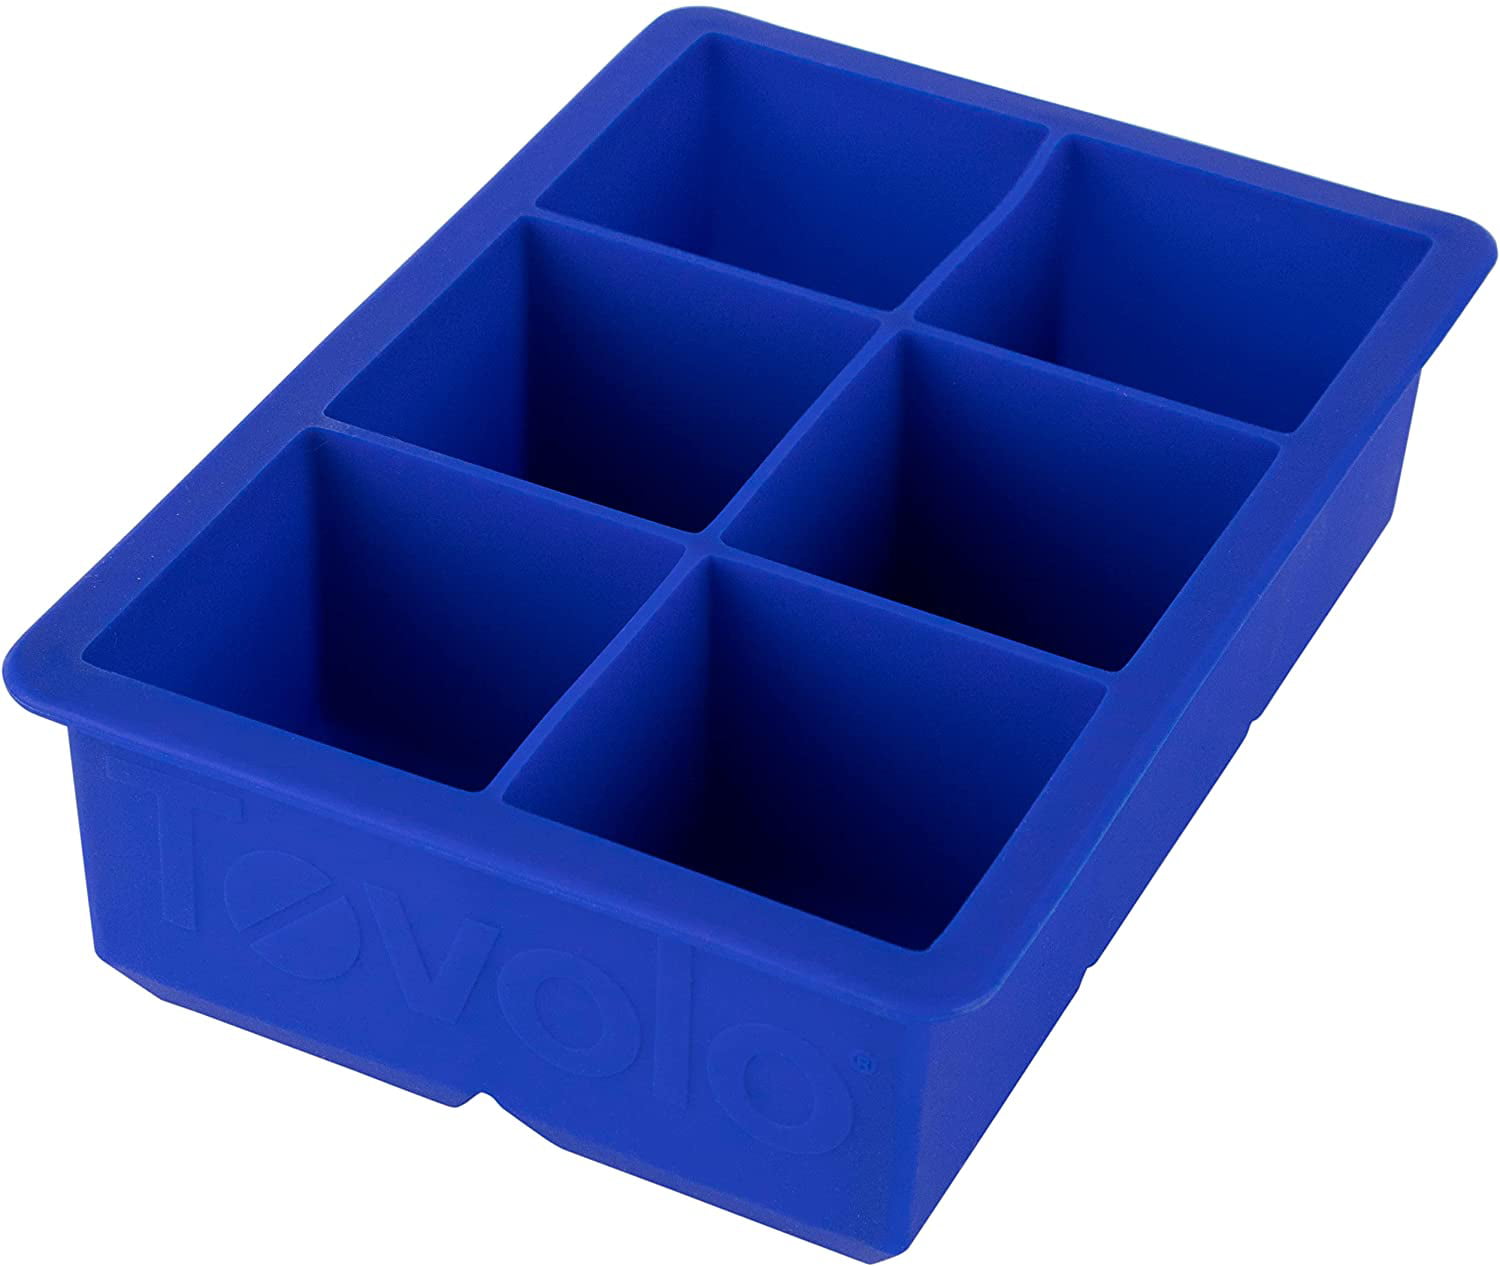 Spirits & Liquor Drinks Stratus Blue Tovolo Inch Large King Craft Ice Mold Freezer Tray of 2 Cubes for Whiskey BPA-Free Silicone Set of 2 Bourbon 